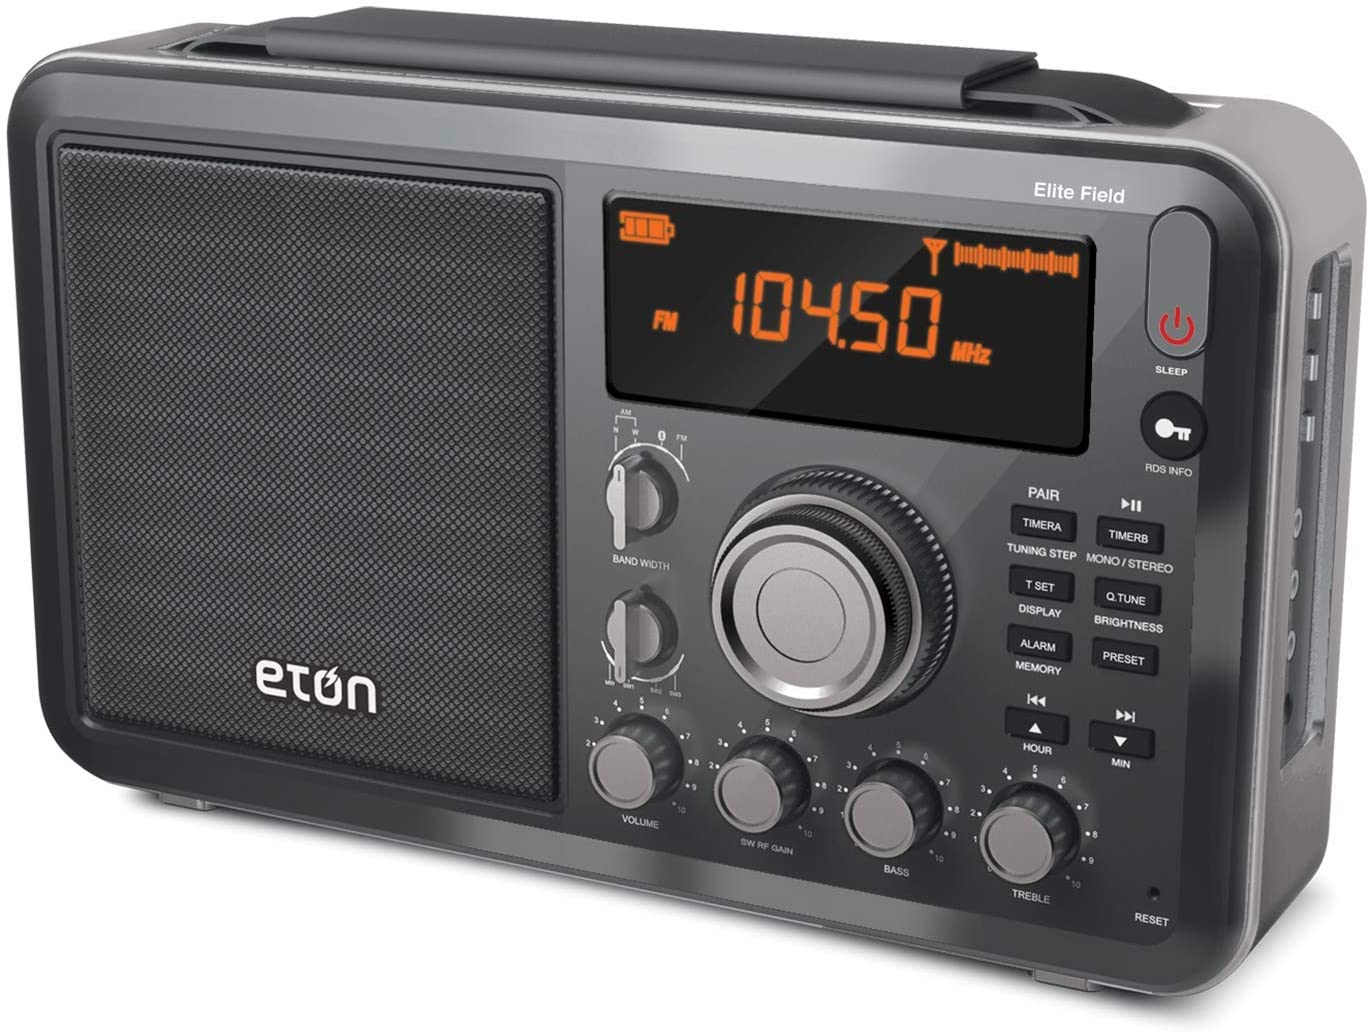 Eton Shortwave Radio Reviews Onesdr A Blog About Radio And Wireless Technology